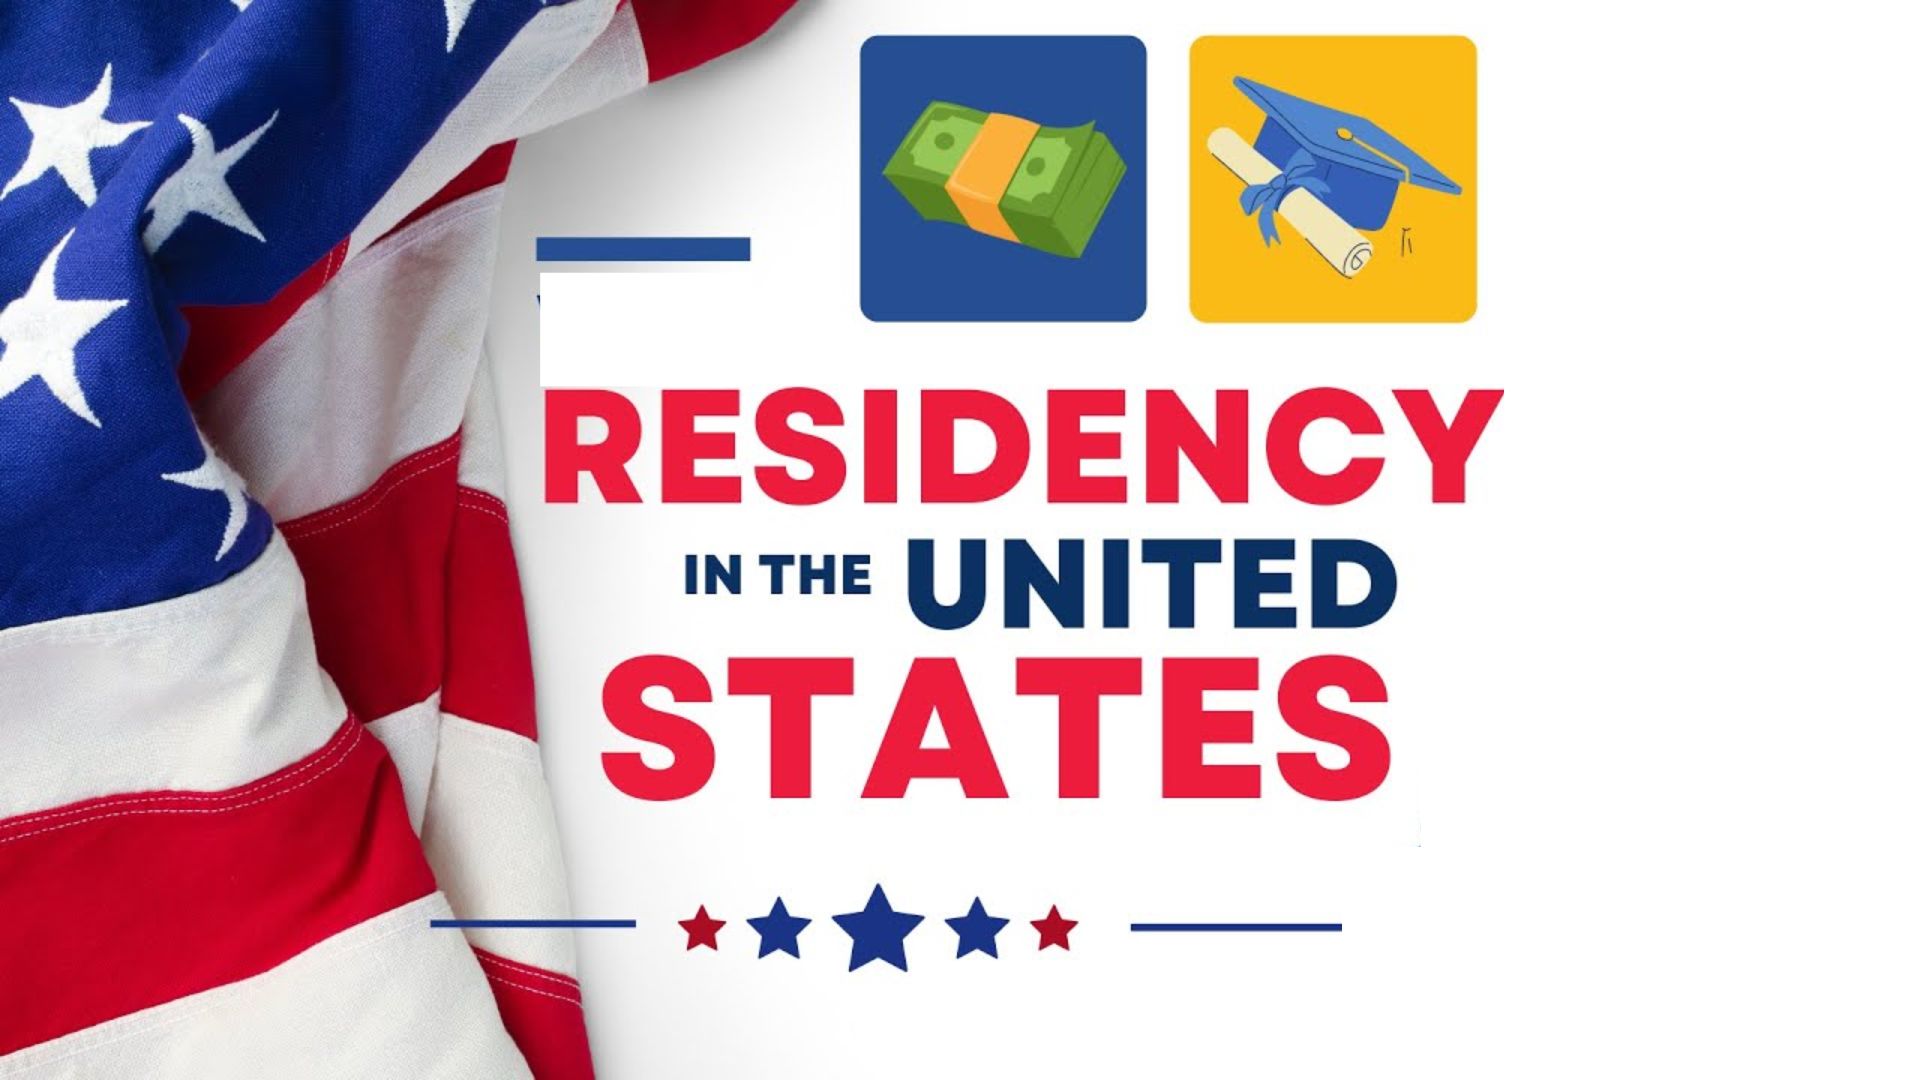 Residency in the United States